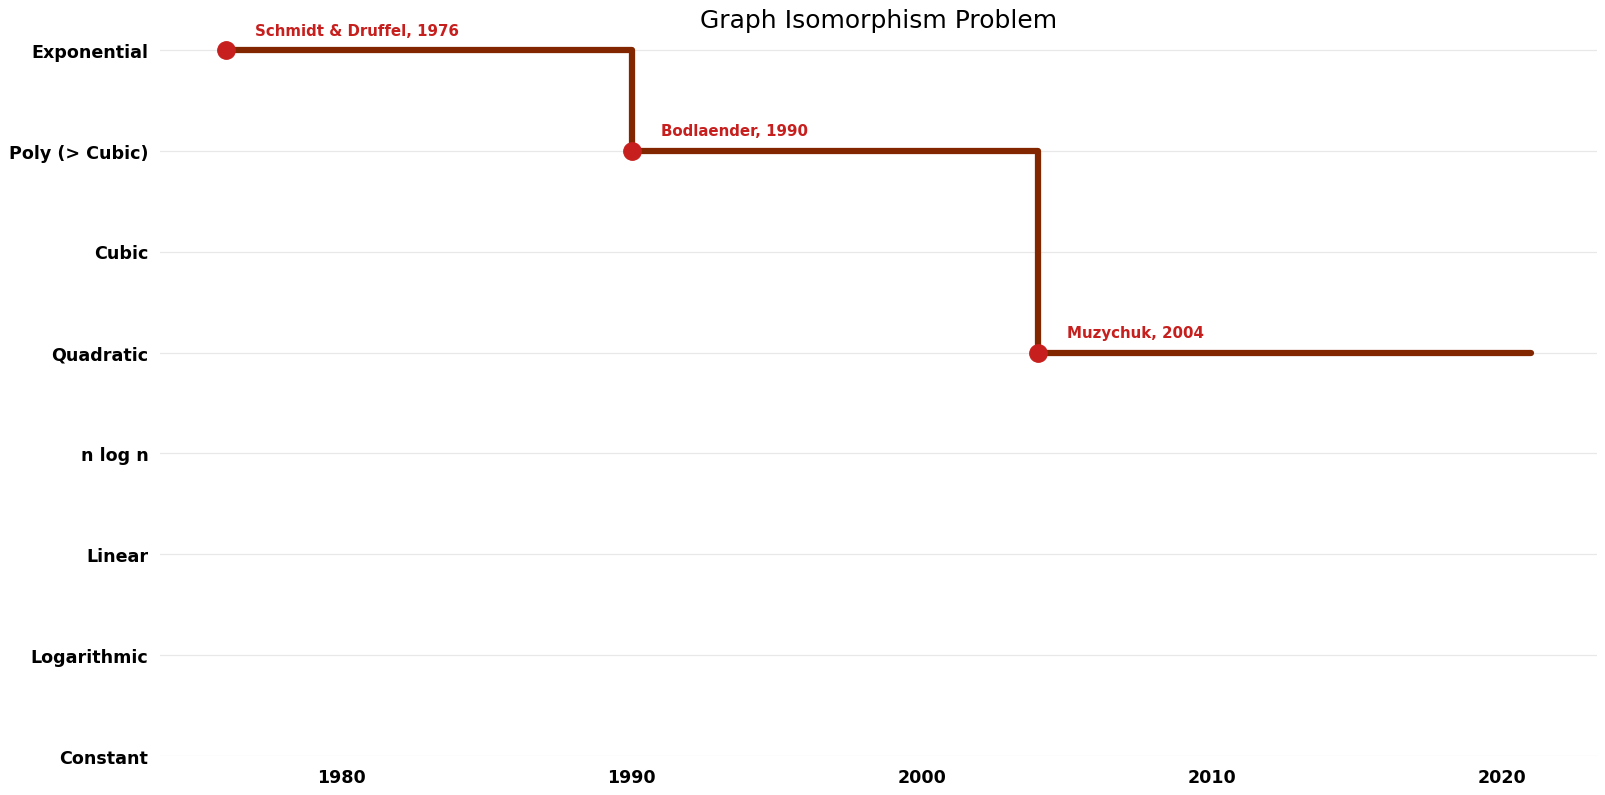 File:Graph Isomorphism Problem - Time.png